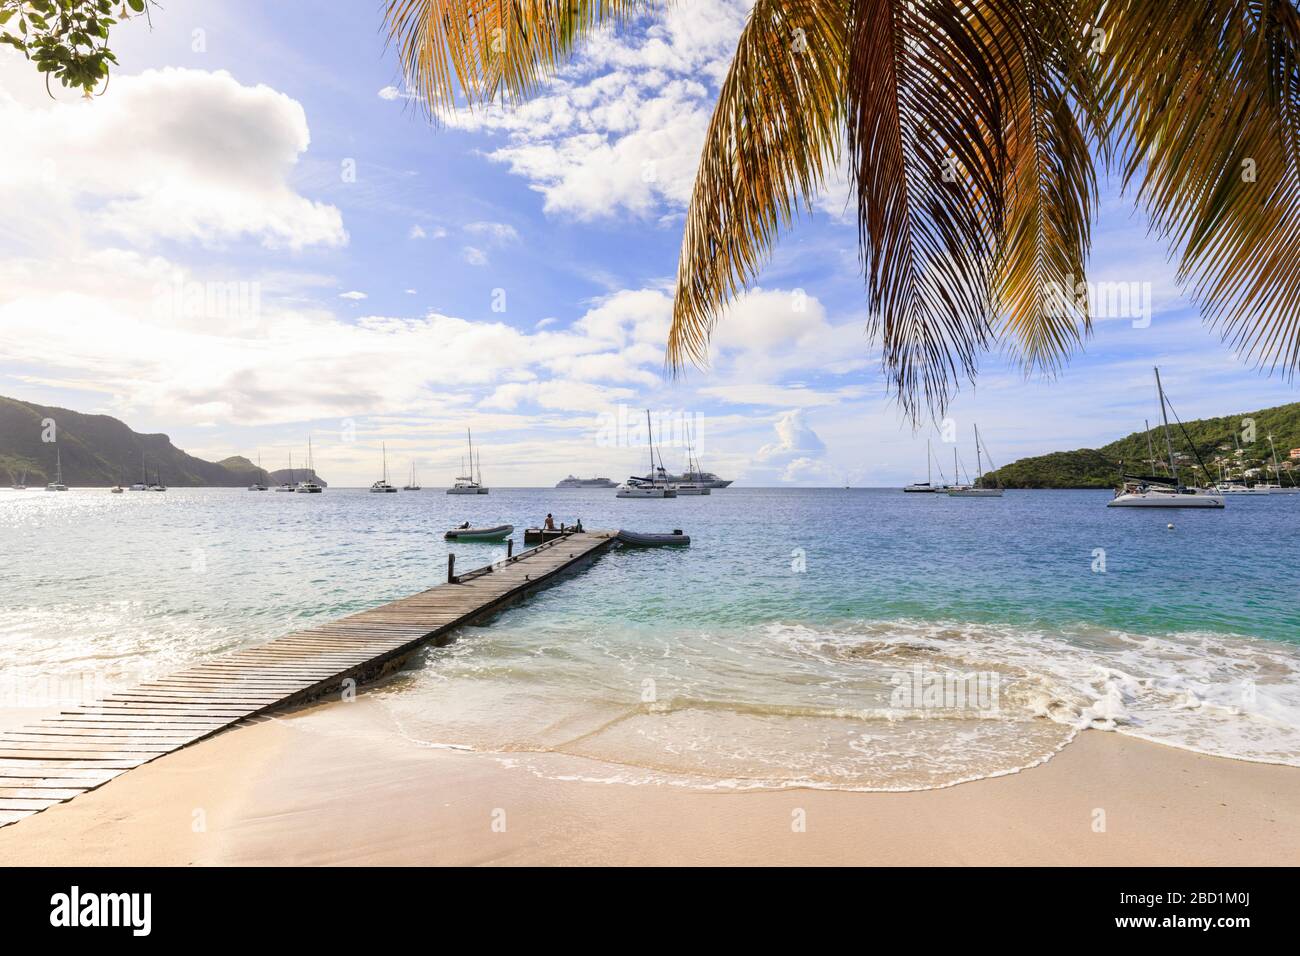 Quiet Caribbean, sea shore palm tree, boat jetty, beautiful Port Elizabeth, Admiralty Bay, Bequia, St. Vincent and The Grenadines, Caribbean Stock Photo